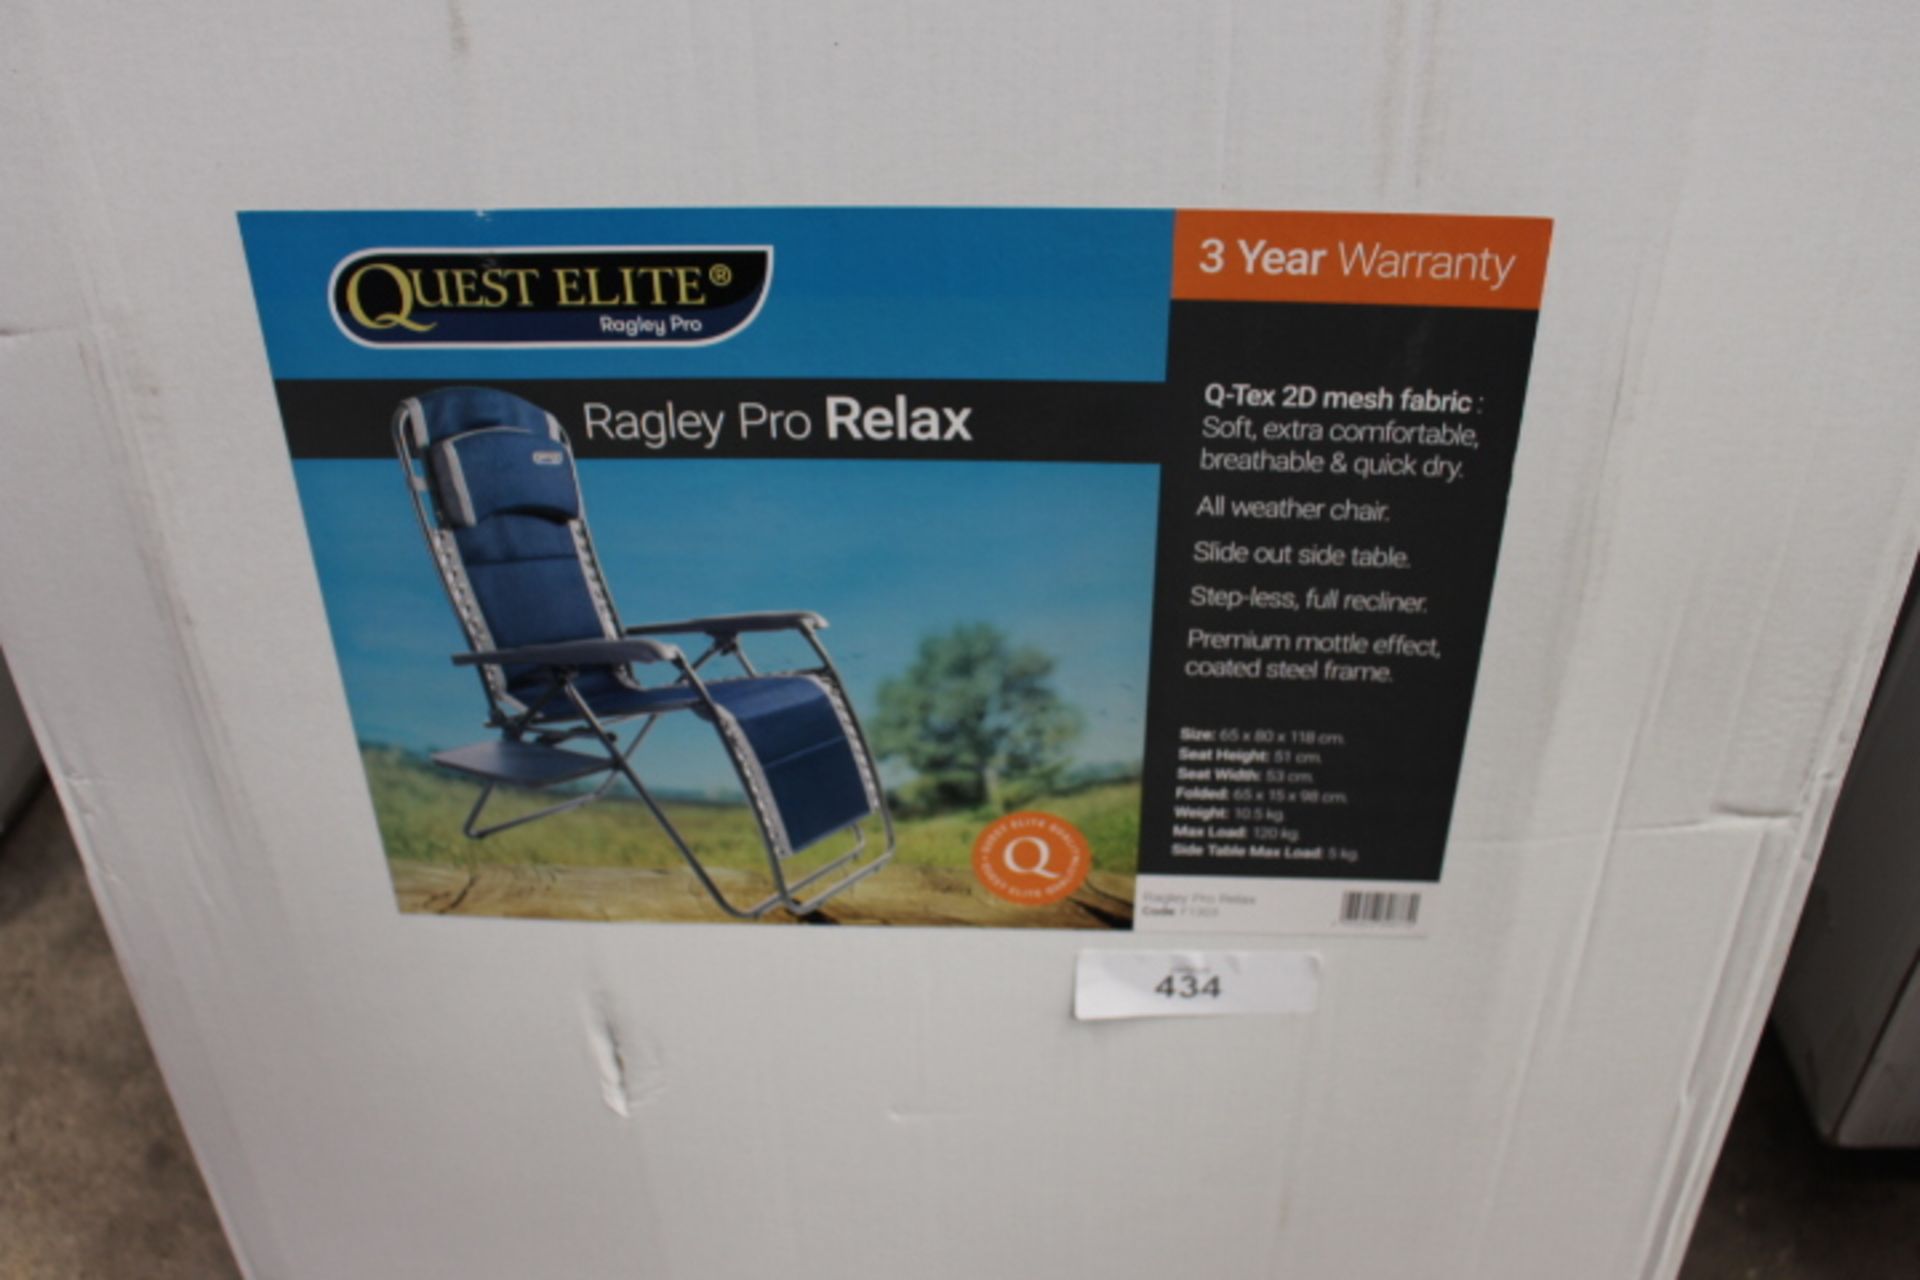 A pair of Quest Elite Ragley Pro Relax blue mesh fabric chairs, code F1303 - New in box (GS5)